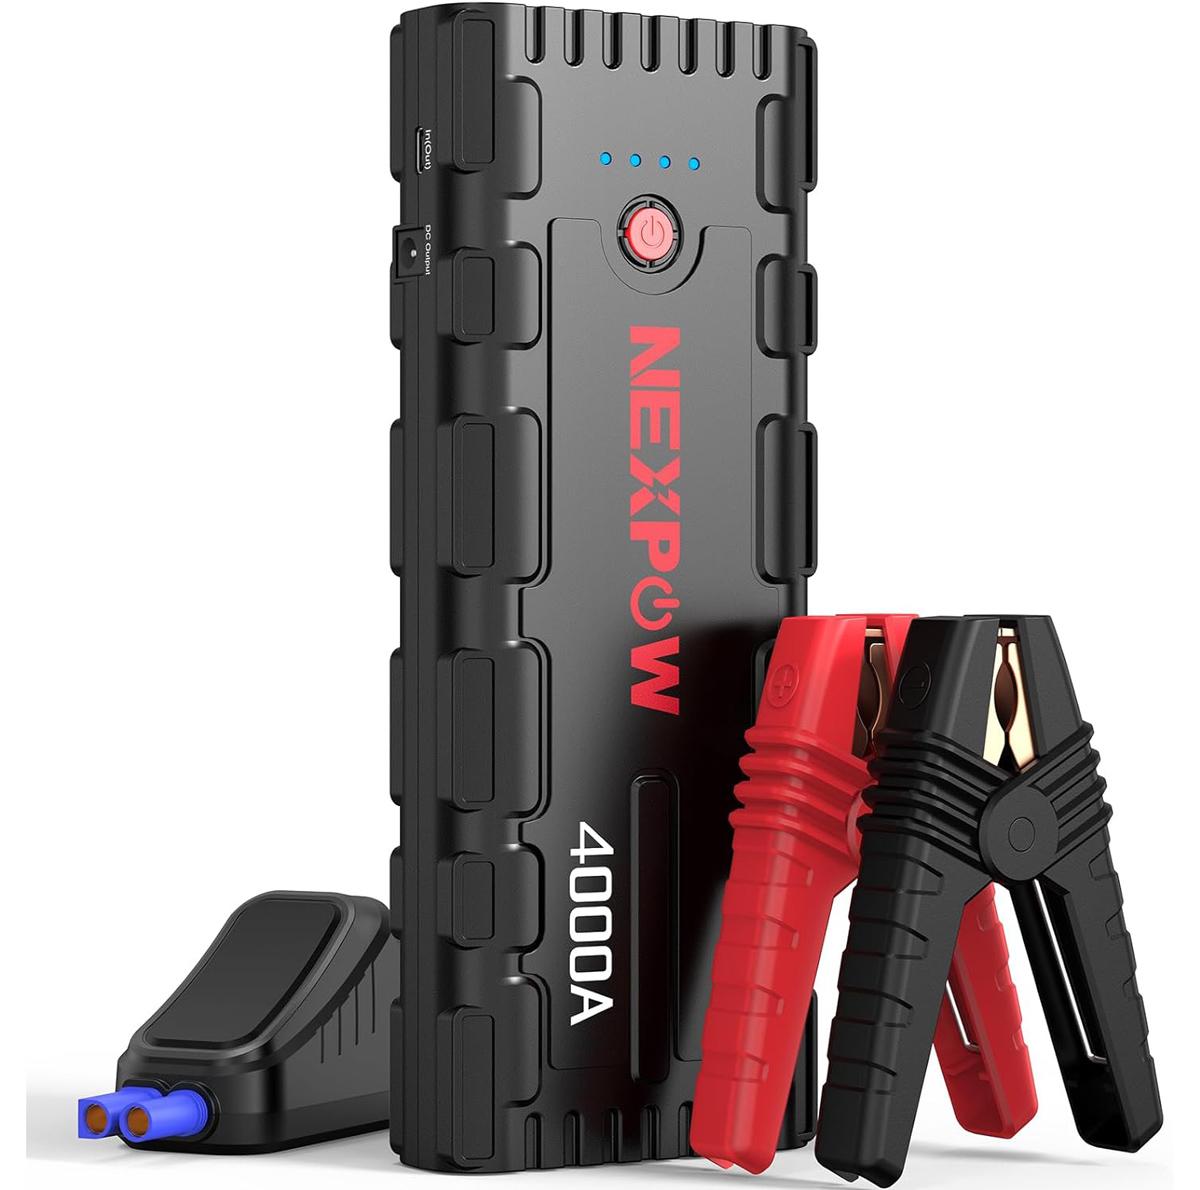 Nexpow G17 S40 PD60W Battery Car Jump Starter for $49.99 Shipped